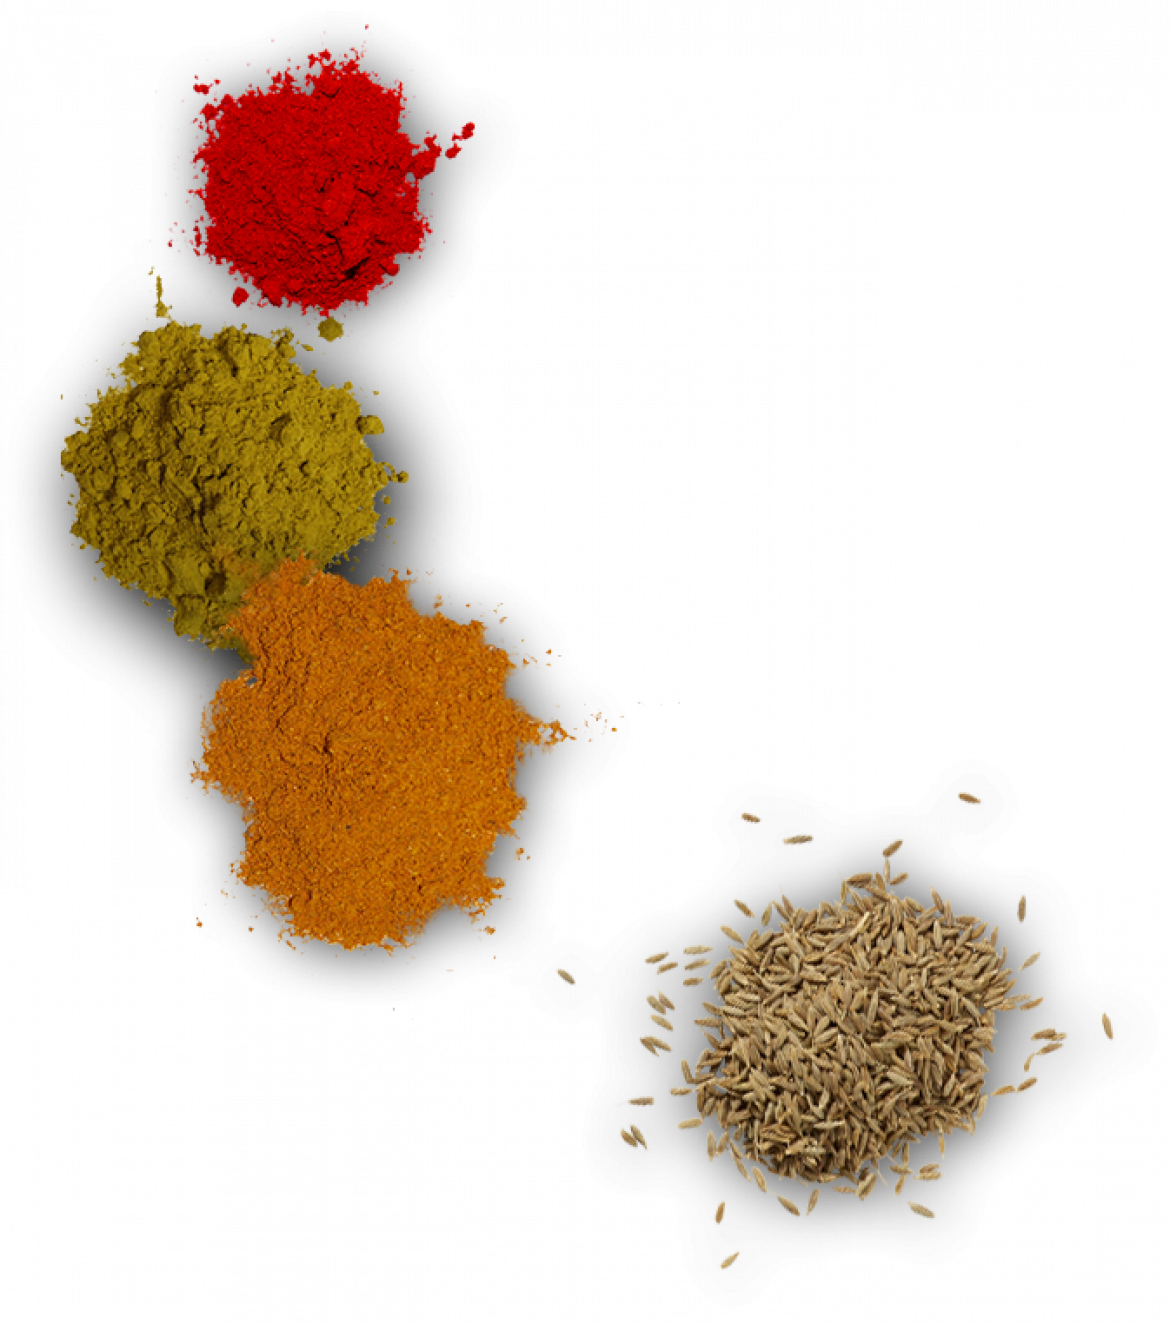 spices.png